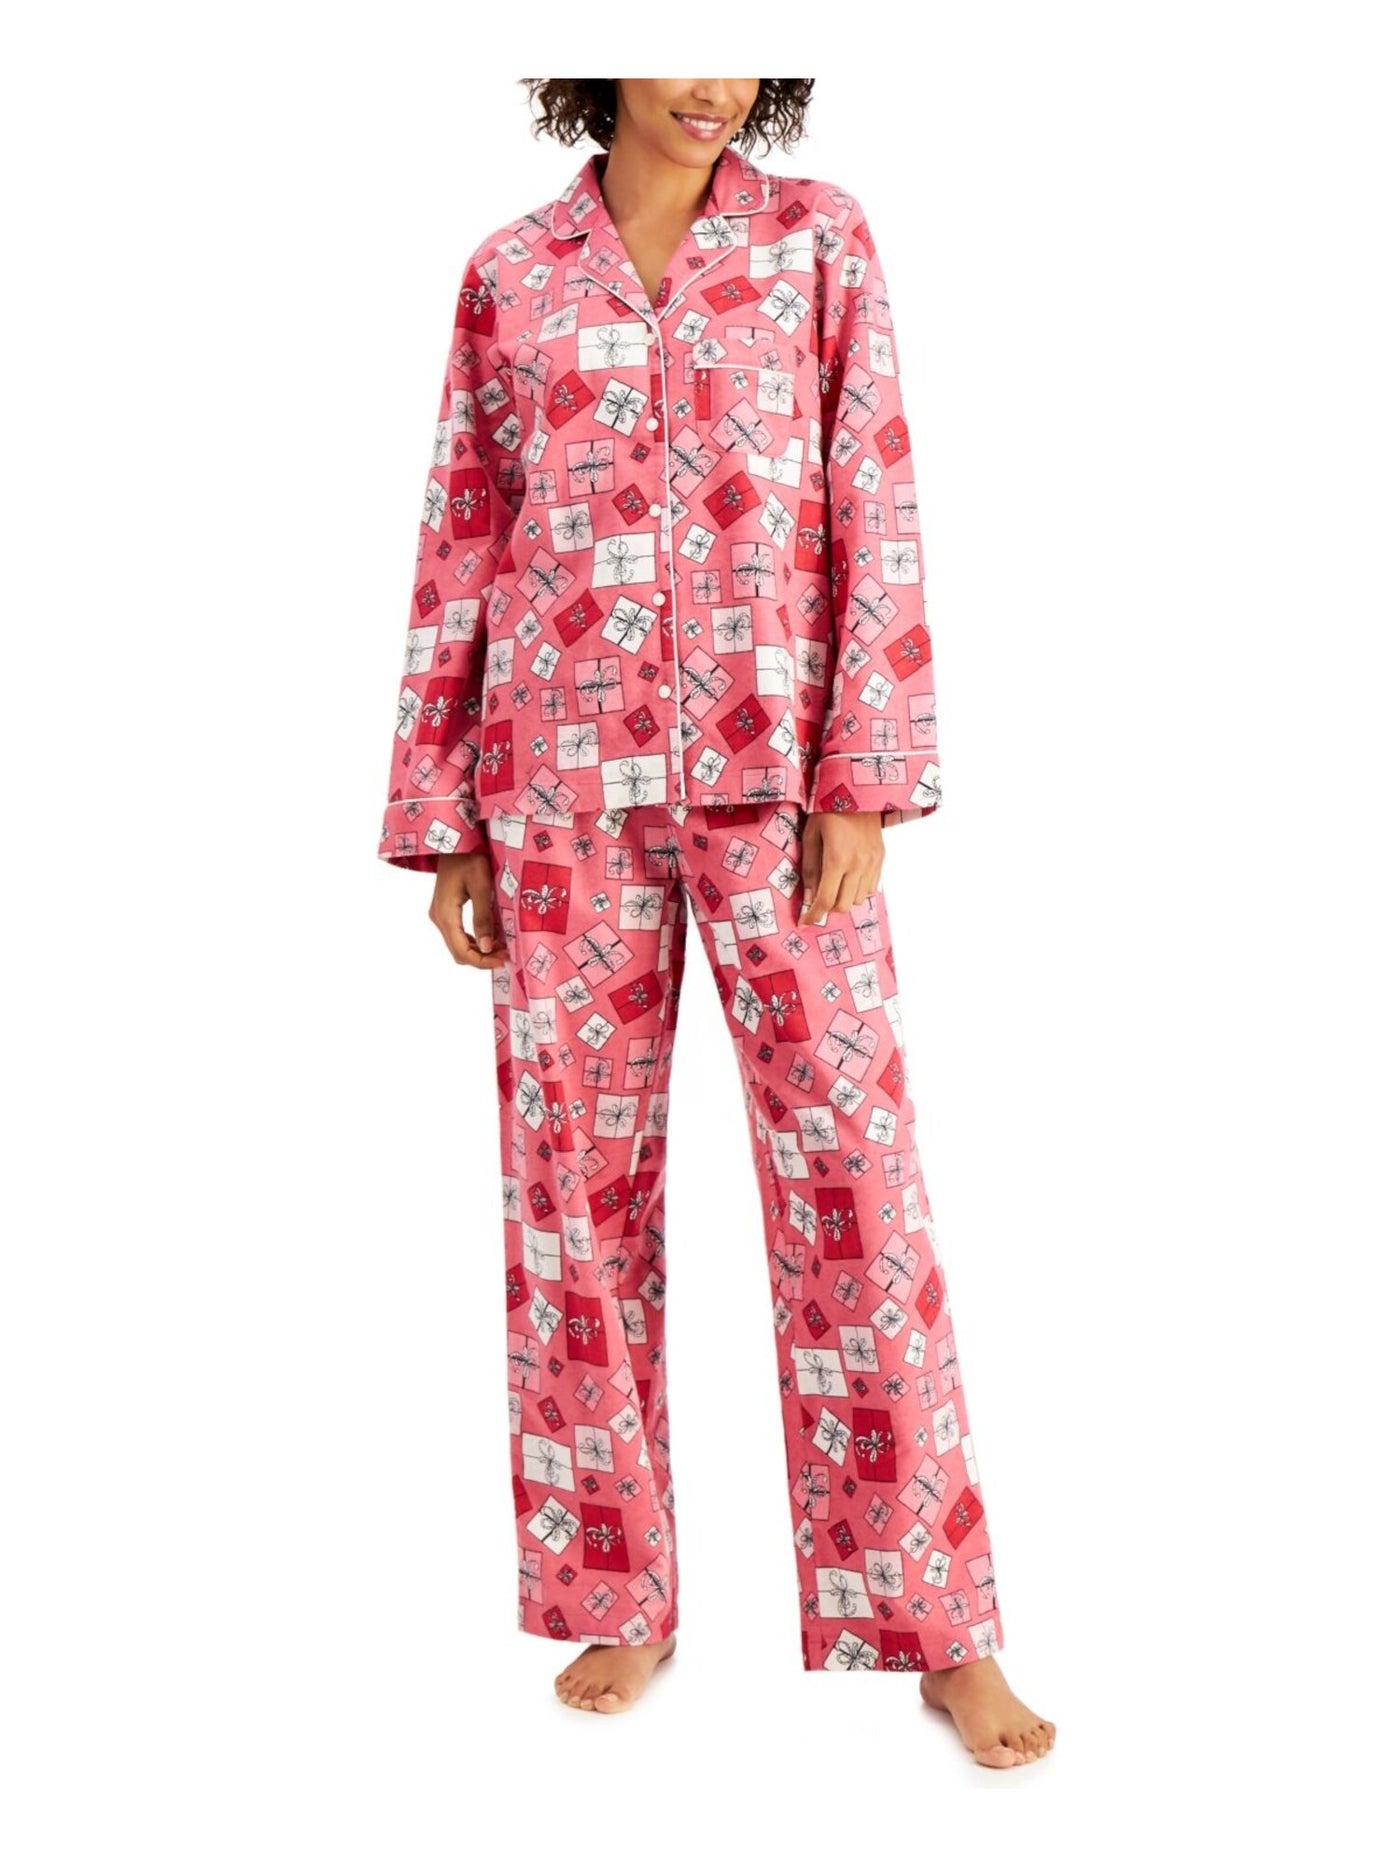 CHARTER CLUB Womens Pink Printed Pocketed Long Sleeve Button Up Top Straight leg Pants Pajamas XS